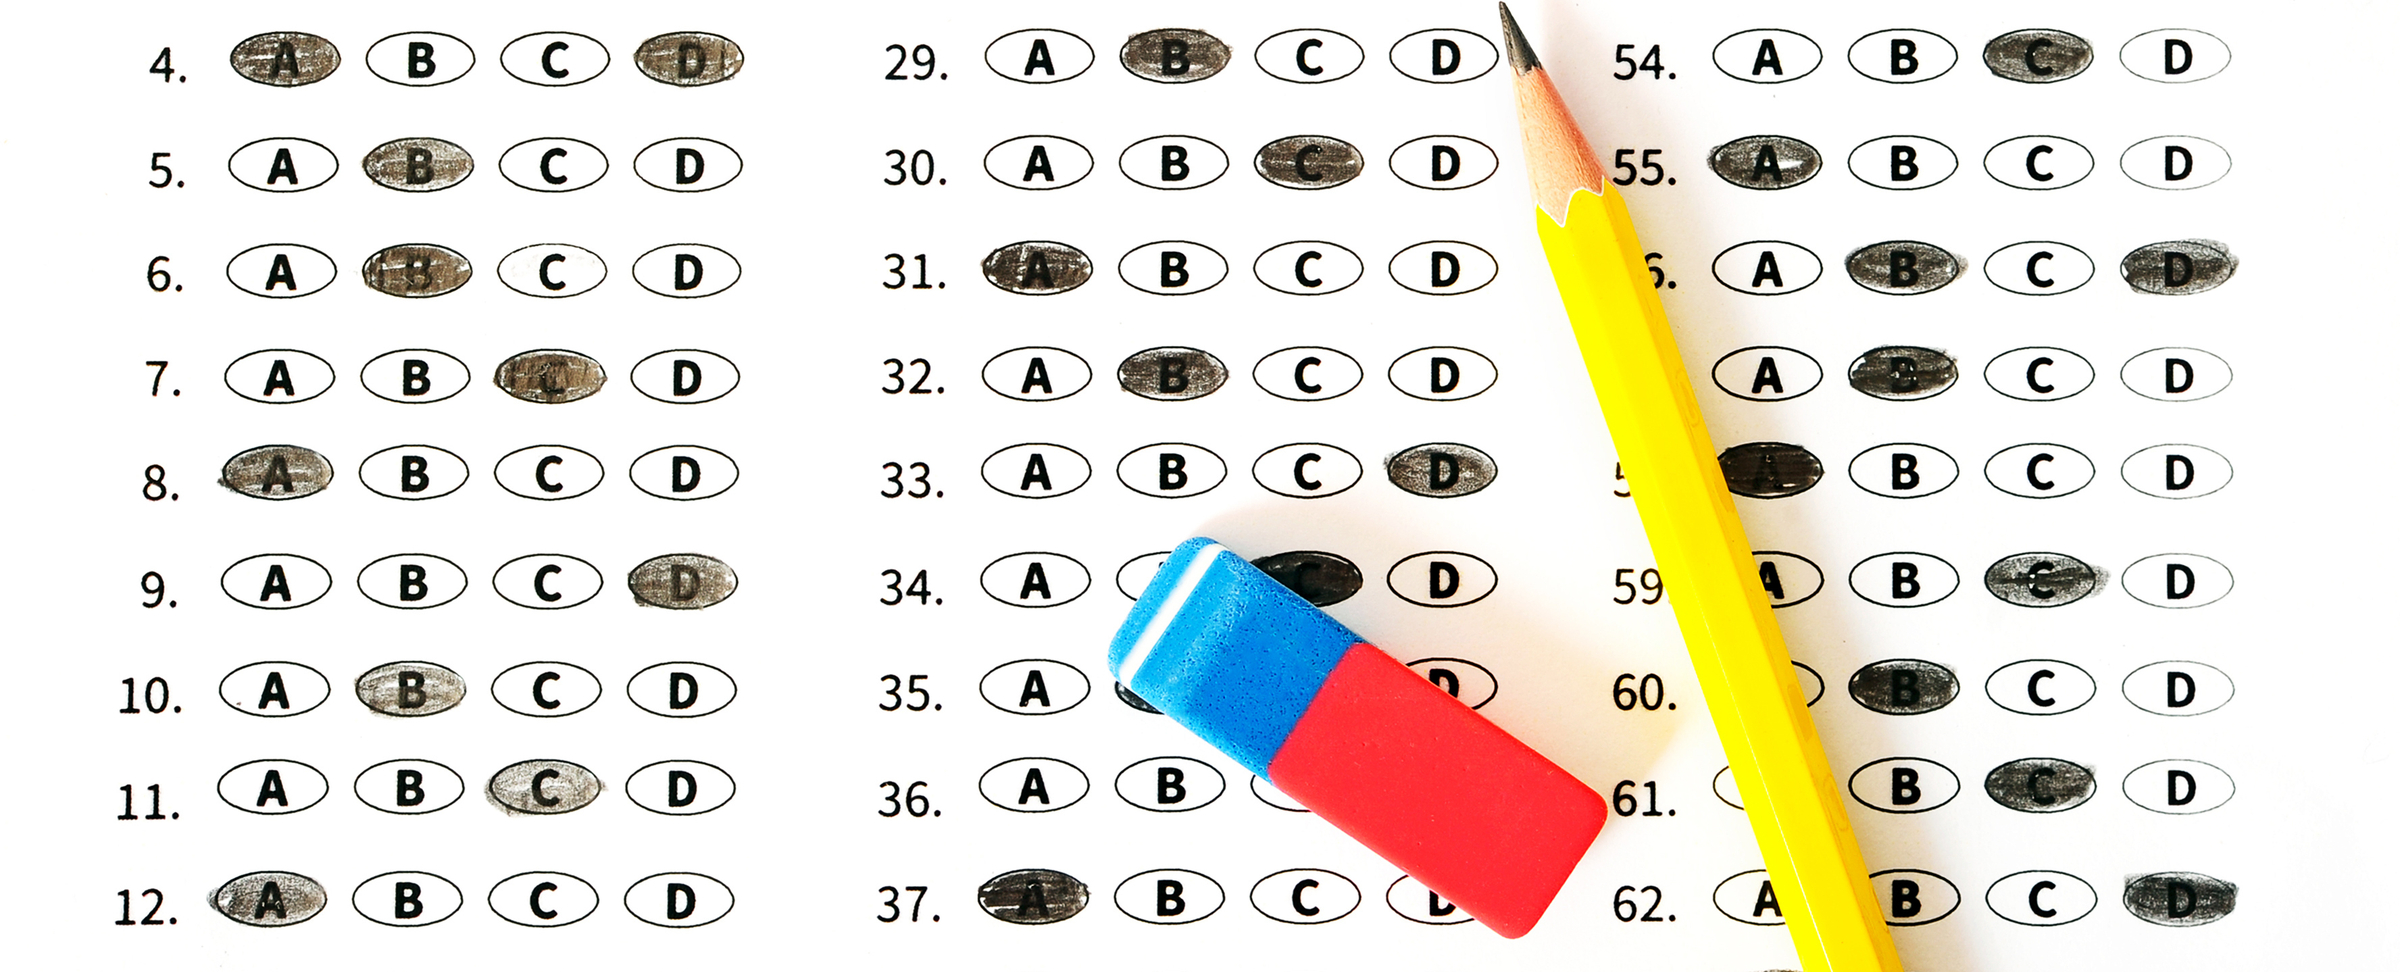 college board test 9 answers